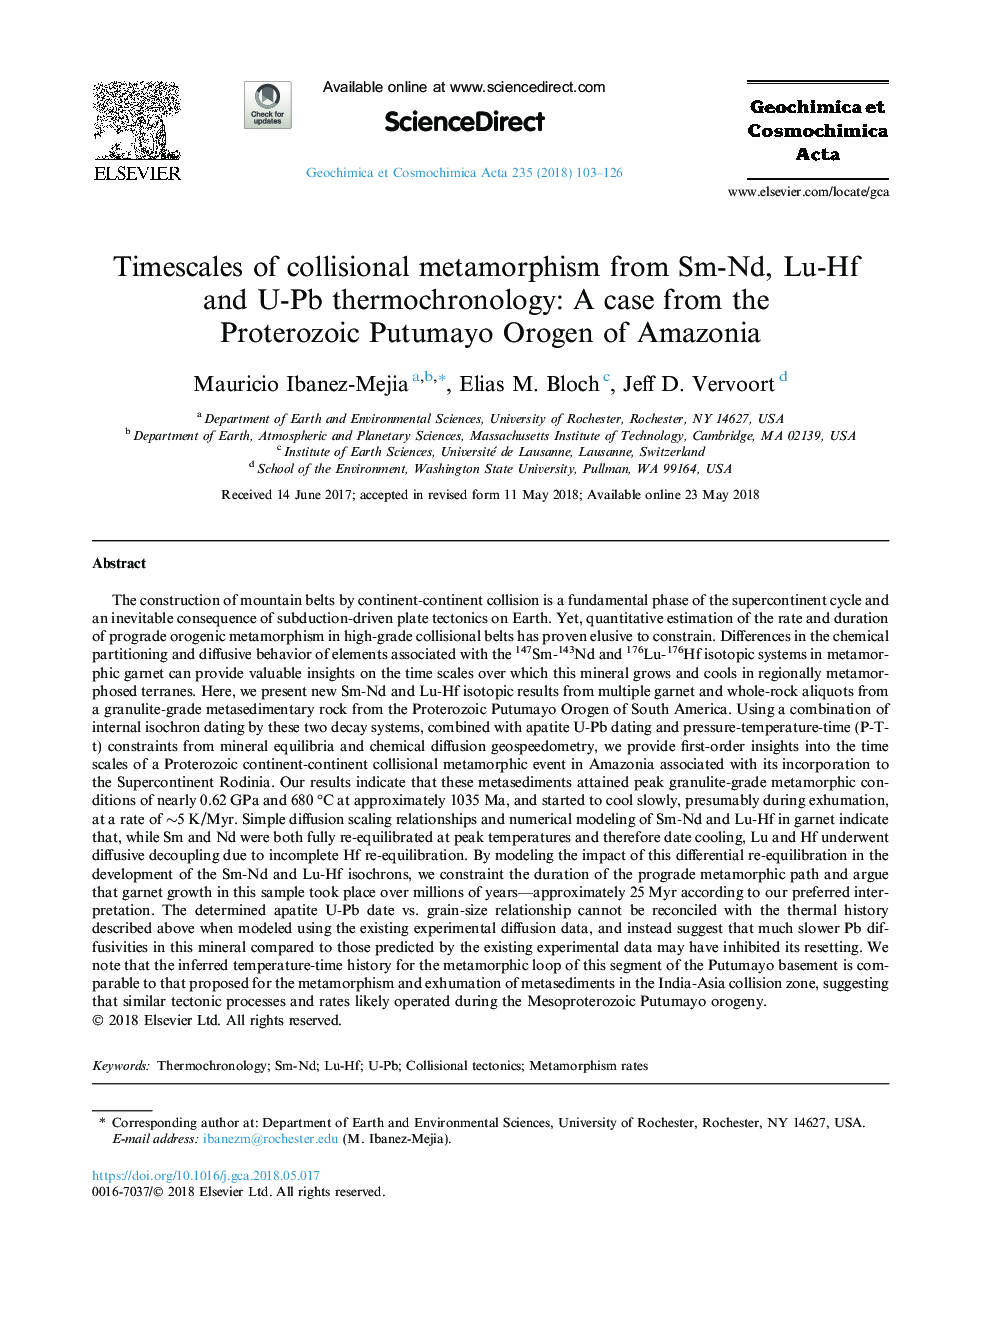 Timescales of collisional metamorphism from Sm-Nd, Lu-Hf and U-Pb thermochronology: A case from the Proterozoic Putumayo Orogen of Amazonia